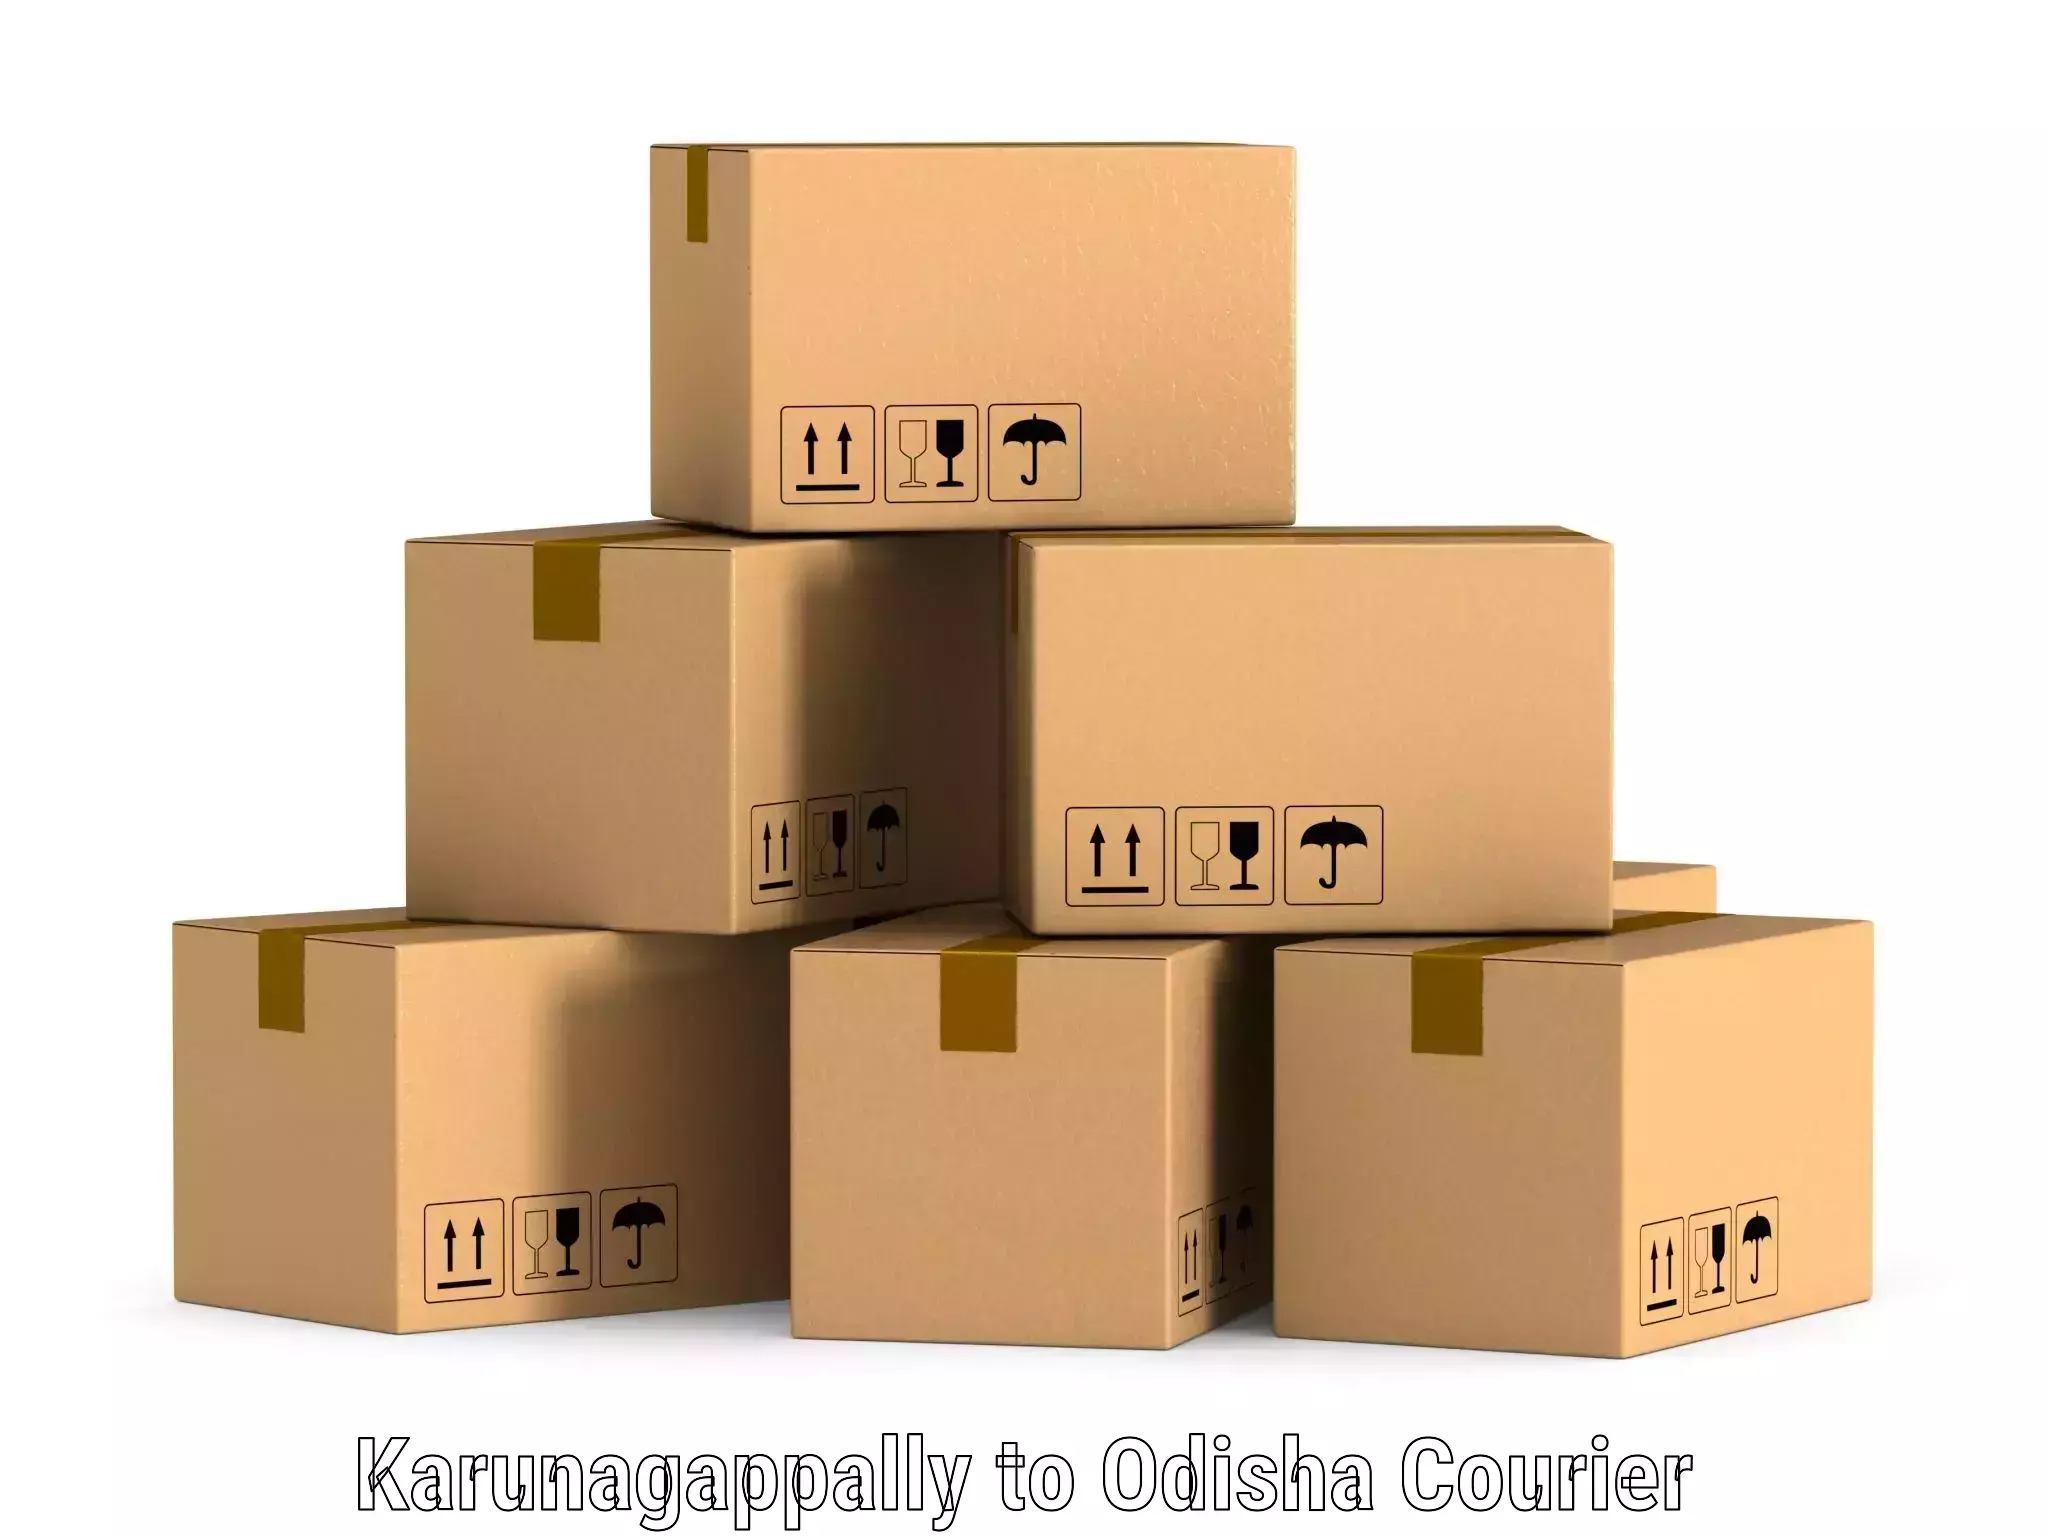 State-of-the-art courier technology in Karunagappally to Raj Berhampur